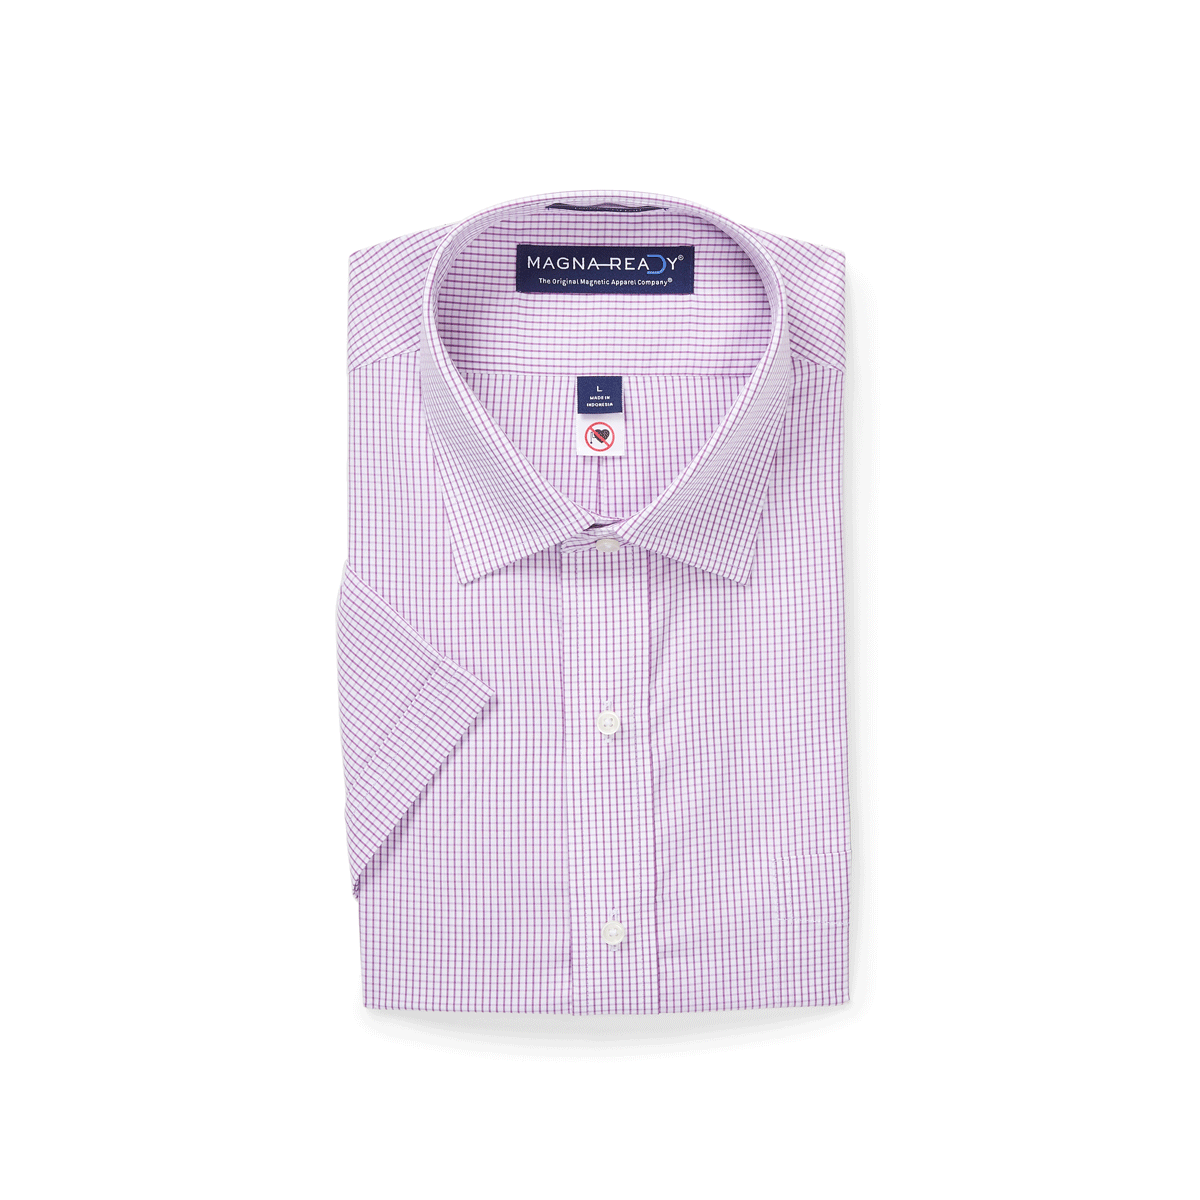 Short Sleeve Burgundy Micro Check ‘Ryan’ Spread Collar Cotton Shirt with Magnetic Closures